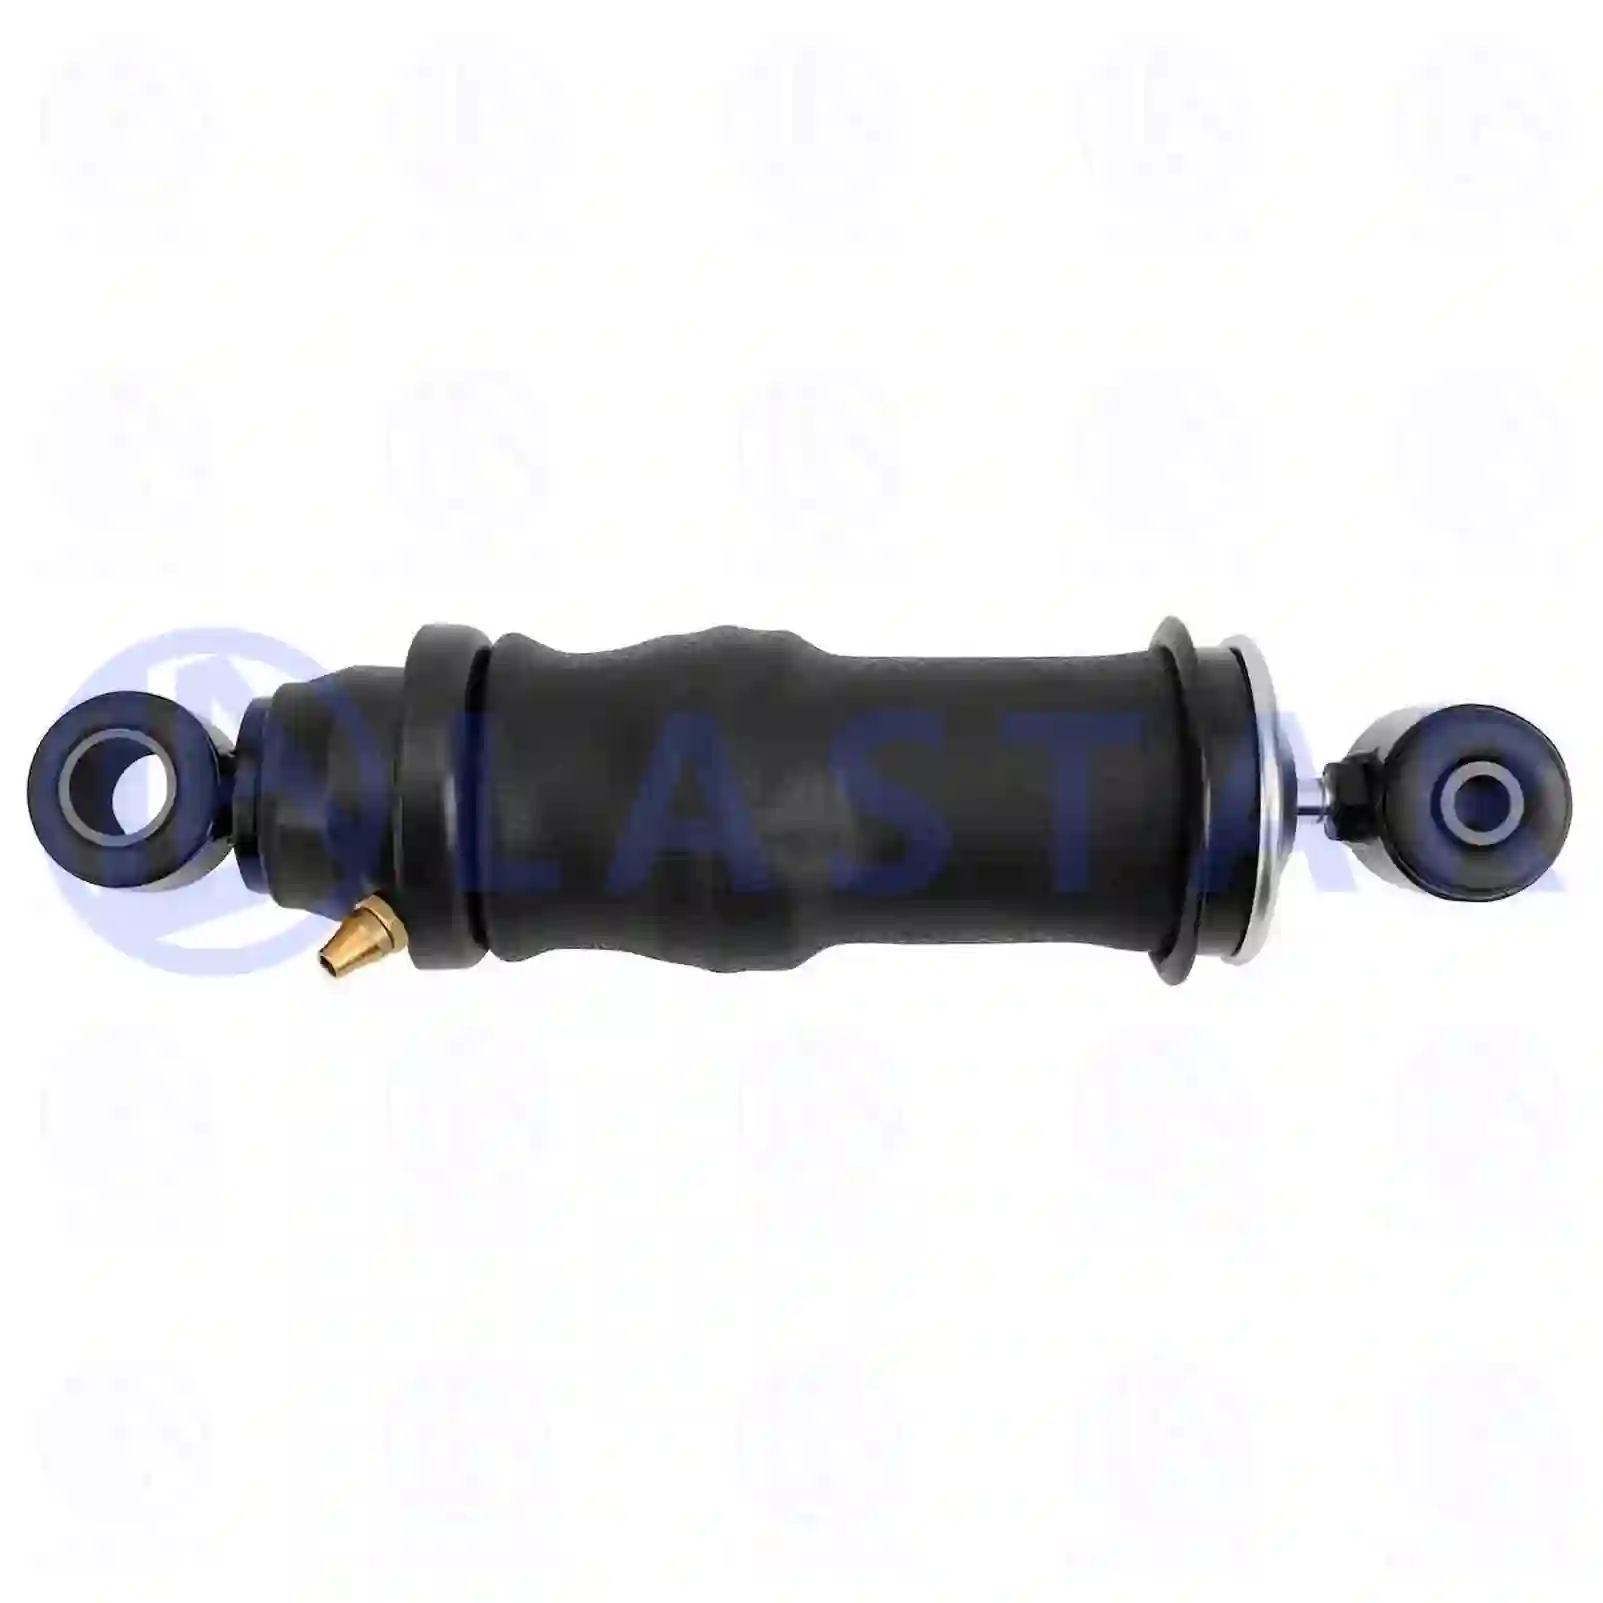  Cabin shock absorber, with air bellow || Lastar Spare Part | Truck Spare Parts, Auotomotive Spare Parts